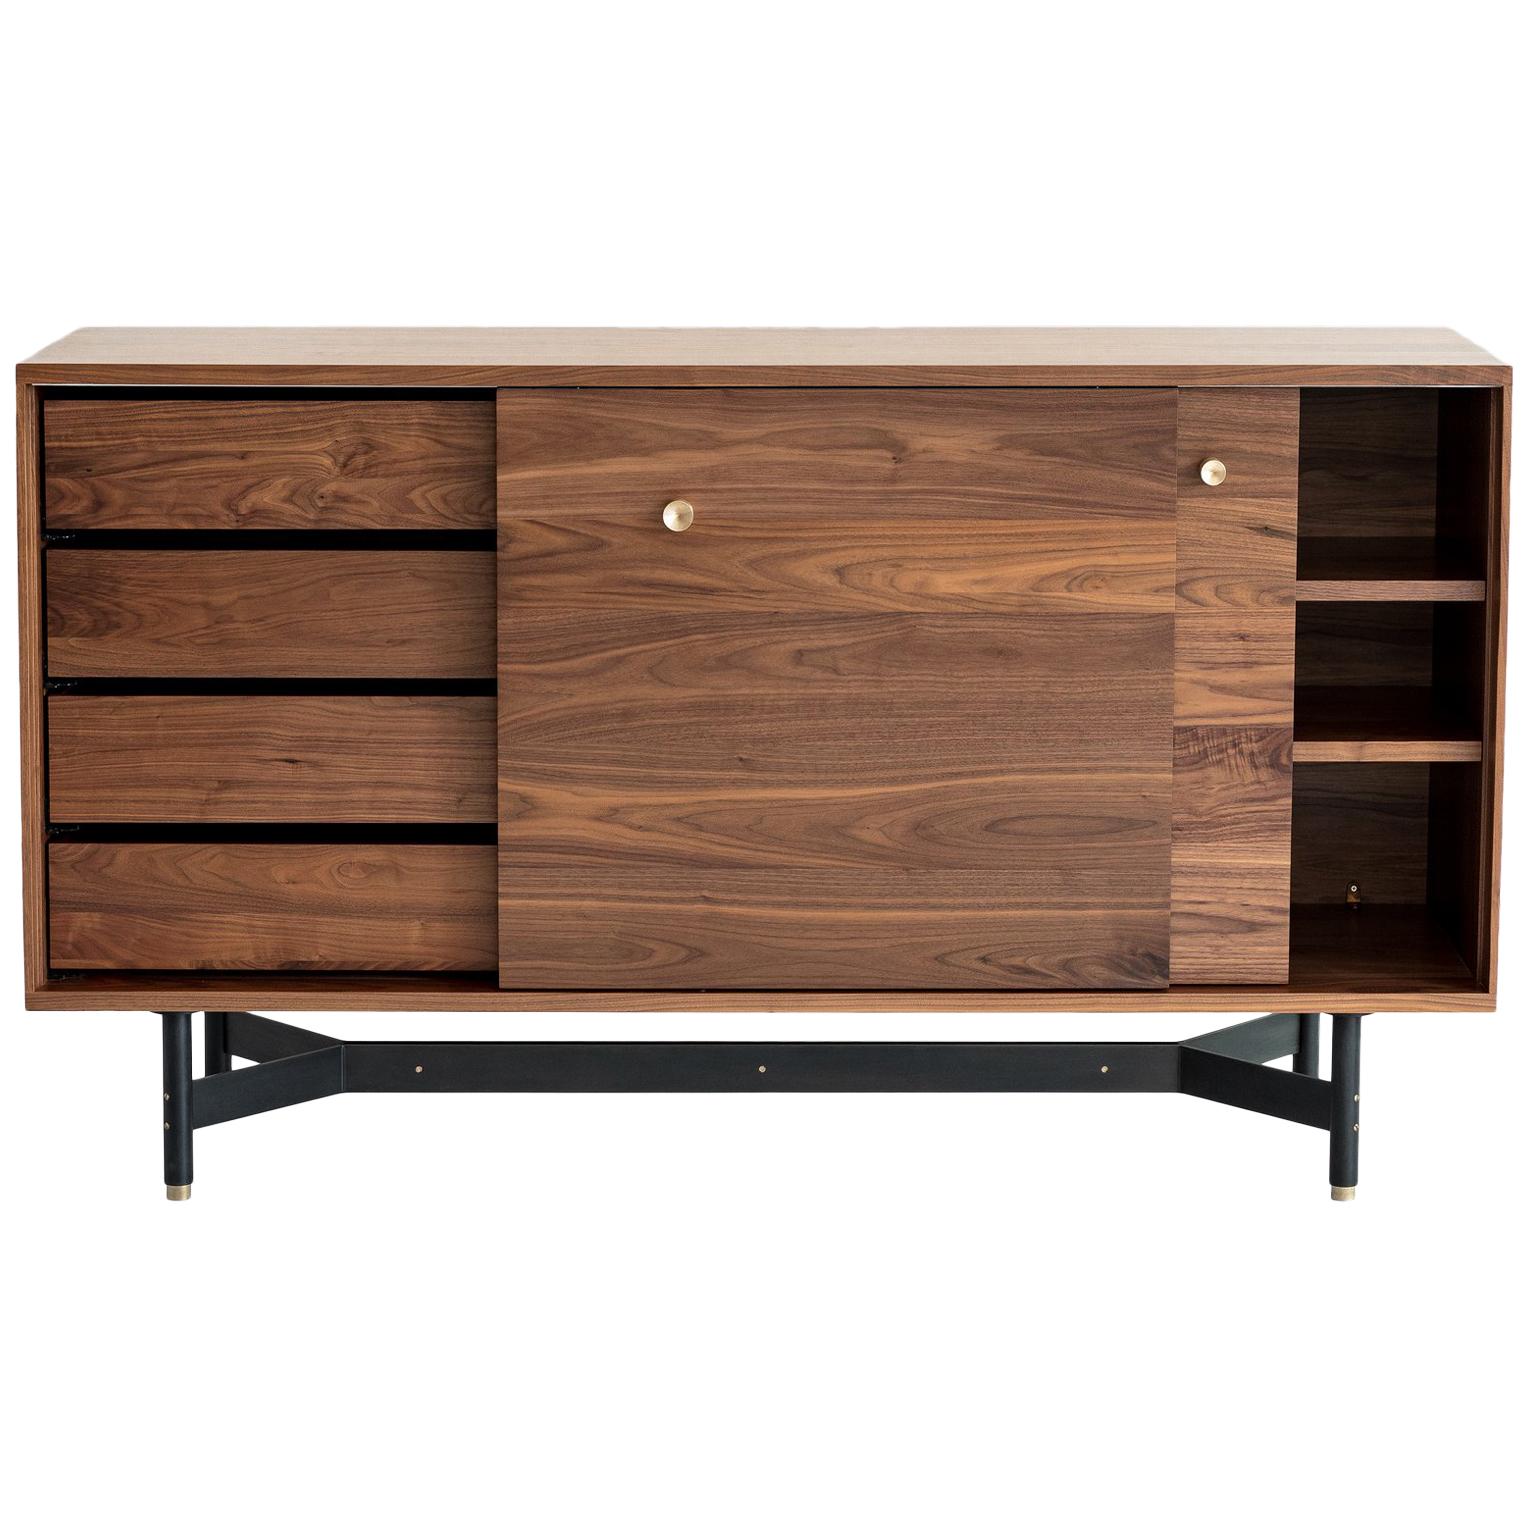 Ac10 Walnut Dresser Console with Drawers, Steel Base and Bronze Accents